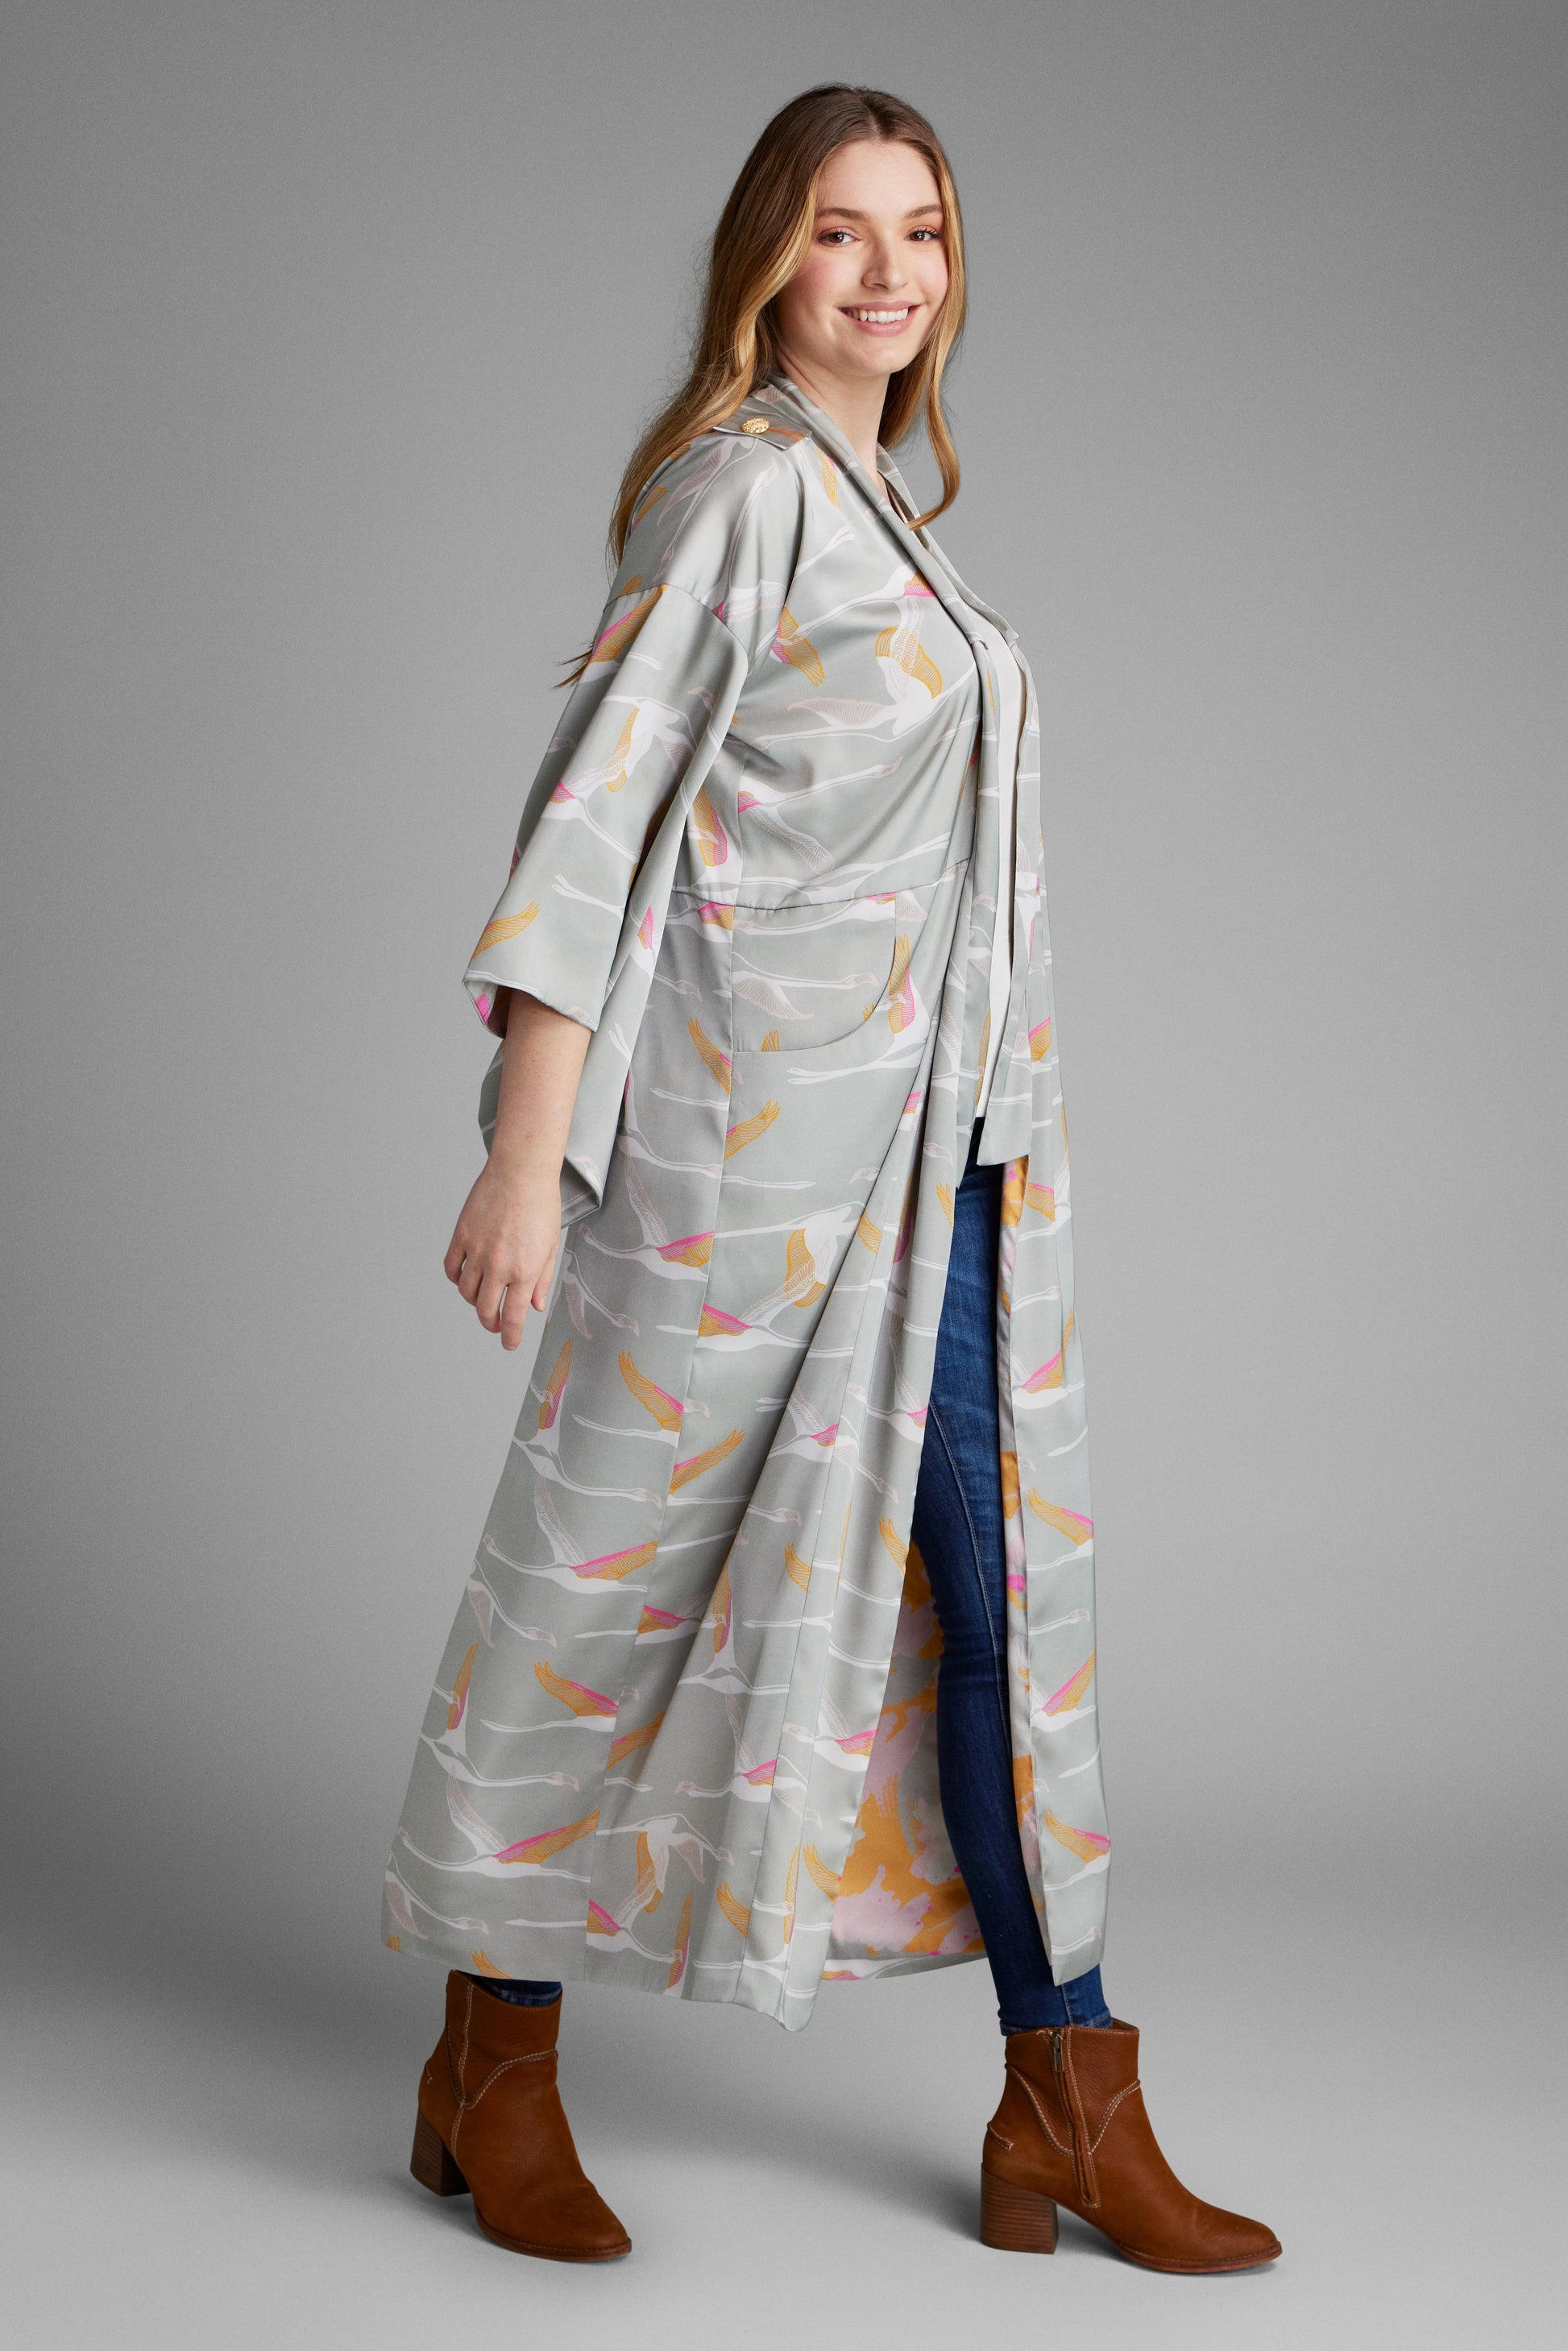 Side profile view of woman wearing a grey pink and gold colored crane print kimono duster made from recycled materials